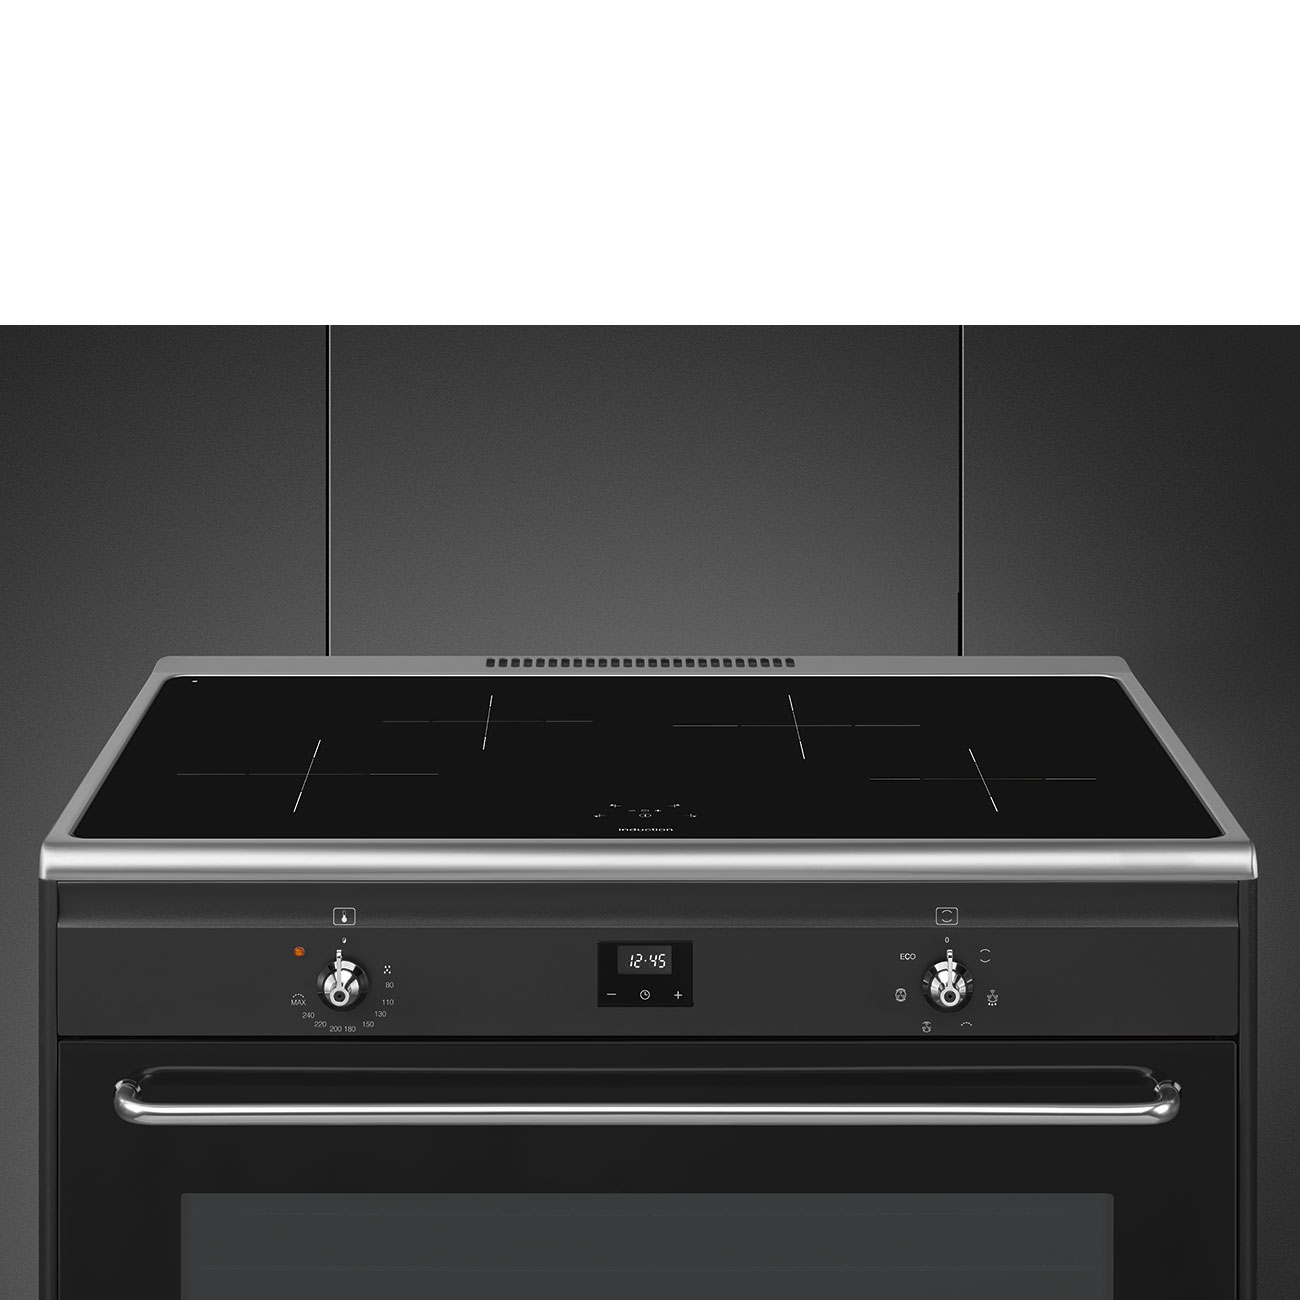 Smeg Anthracite Cooker with Induction Hob_6